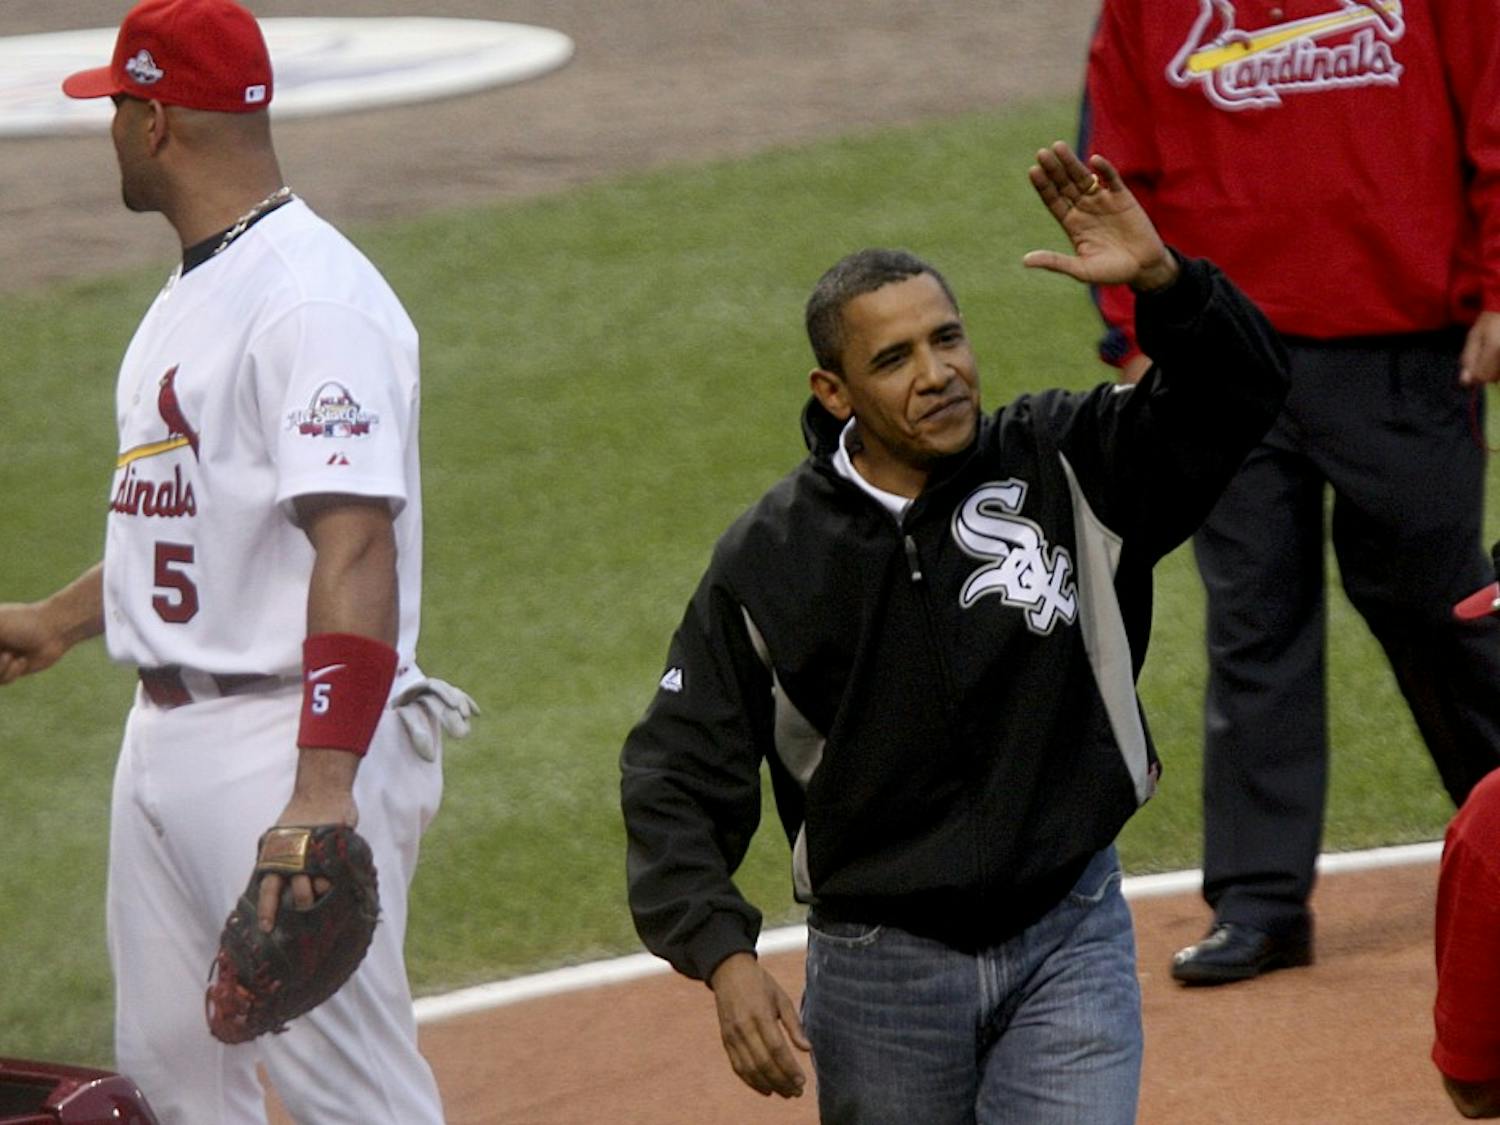 President Barack Obama waves to the crowd after throwing out the first pitch during the opening ceremonies for the 2009 Major League Baseball's All-Star game on Tuesday, July 14, 2009, in St. Louis, Missouri. (Zia Nizami/Belleville News-Democrat/MCT)